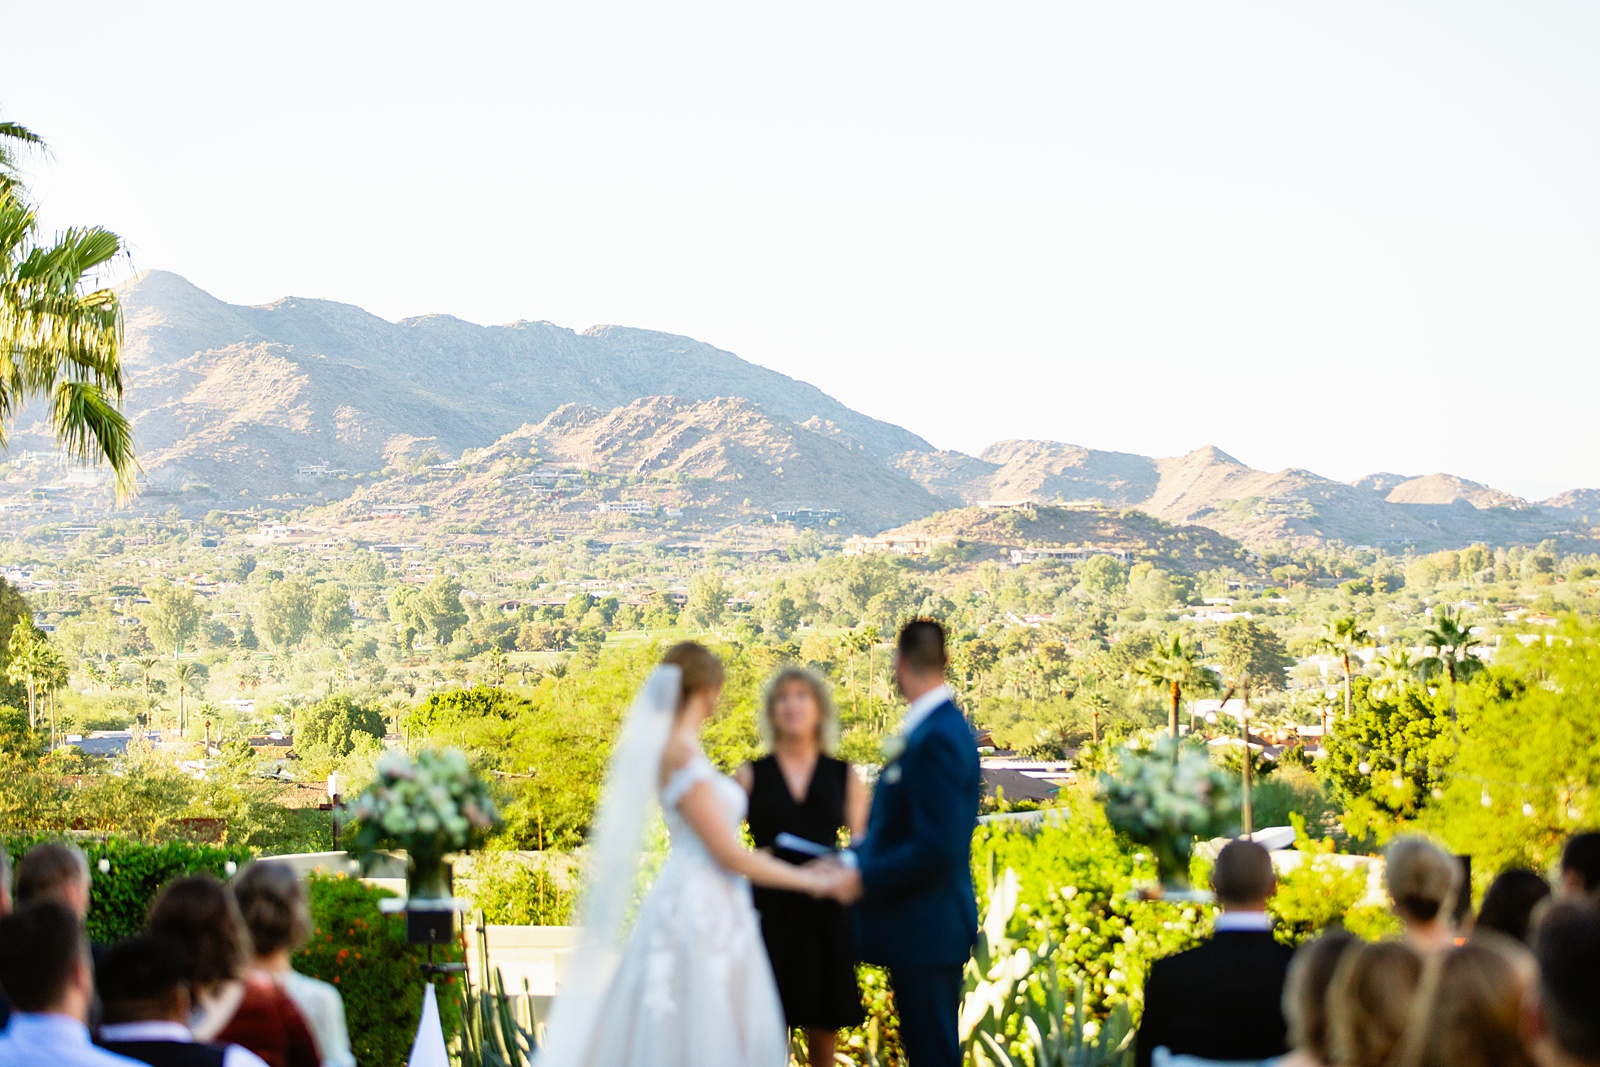 Wedding ceremony at Sanctuary by Phoenix wedding photographer Juniper and Co Photography.